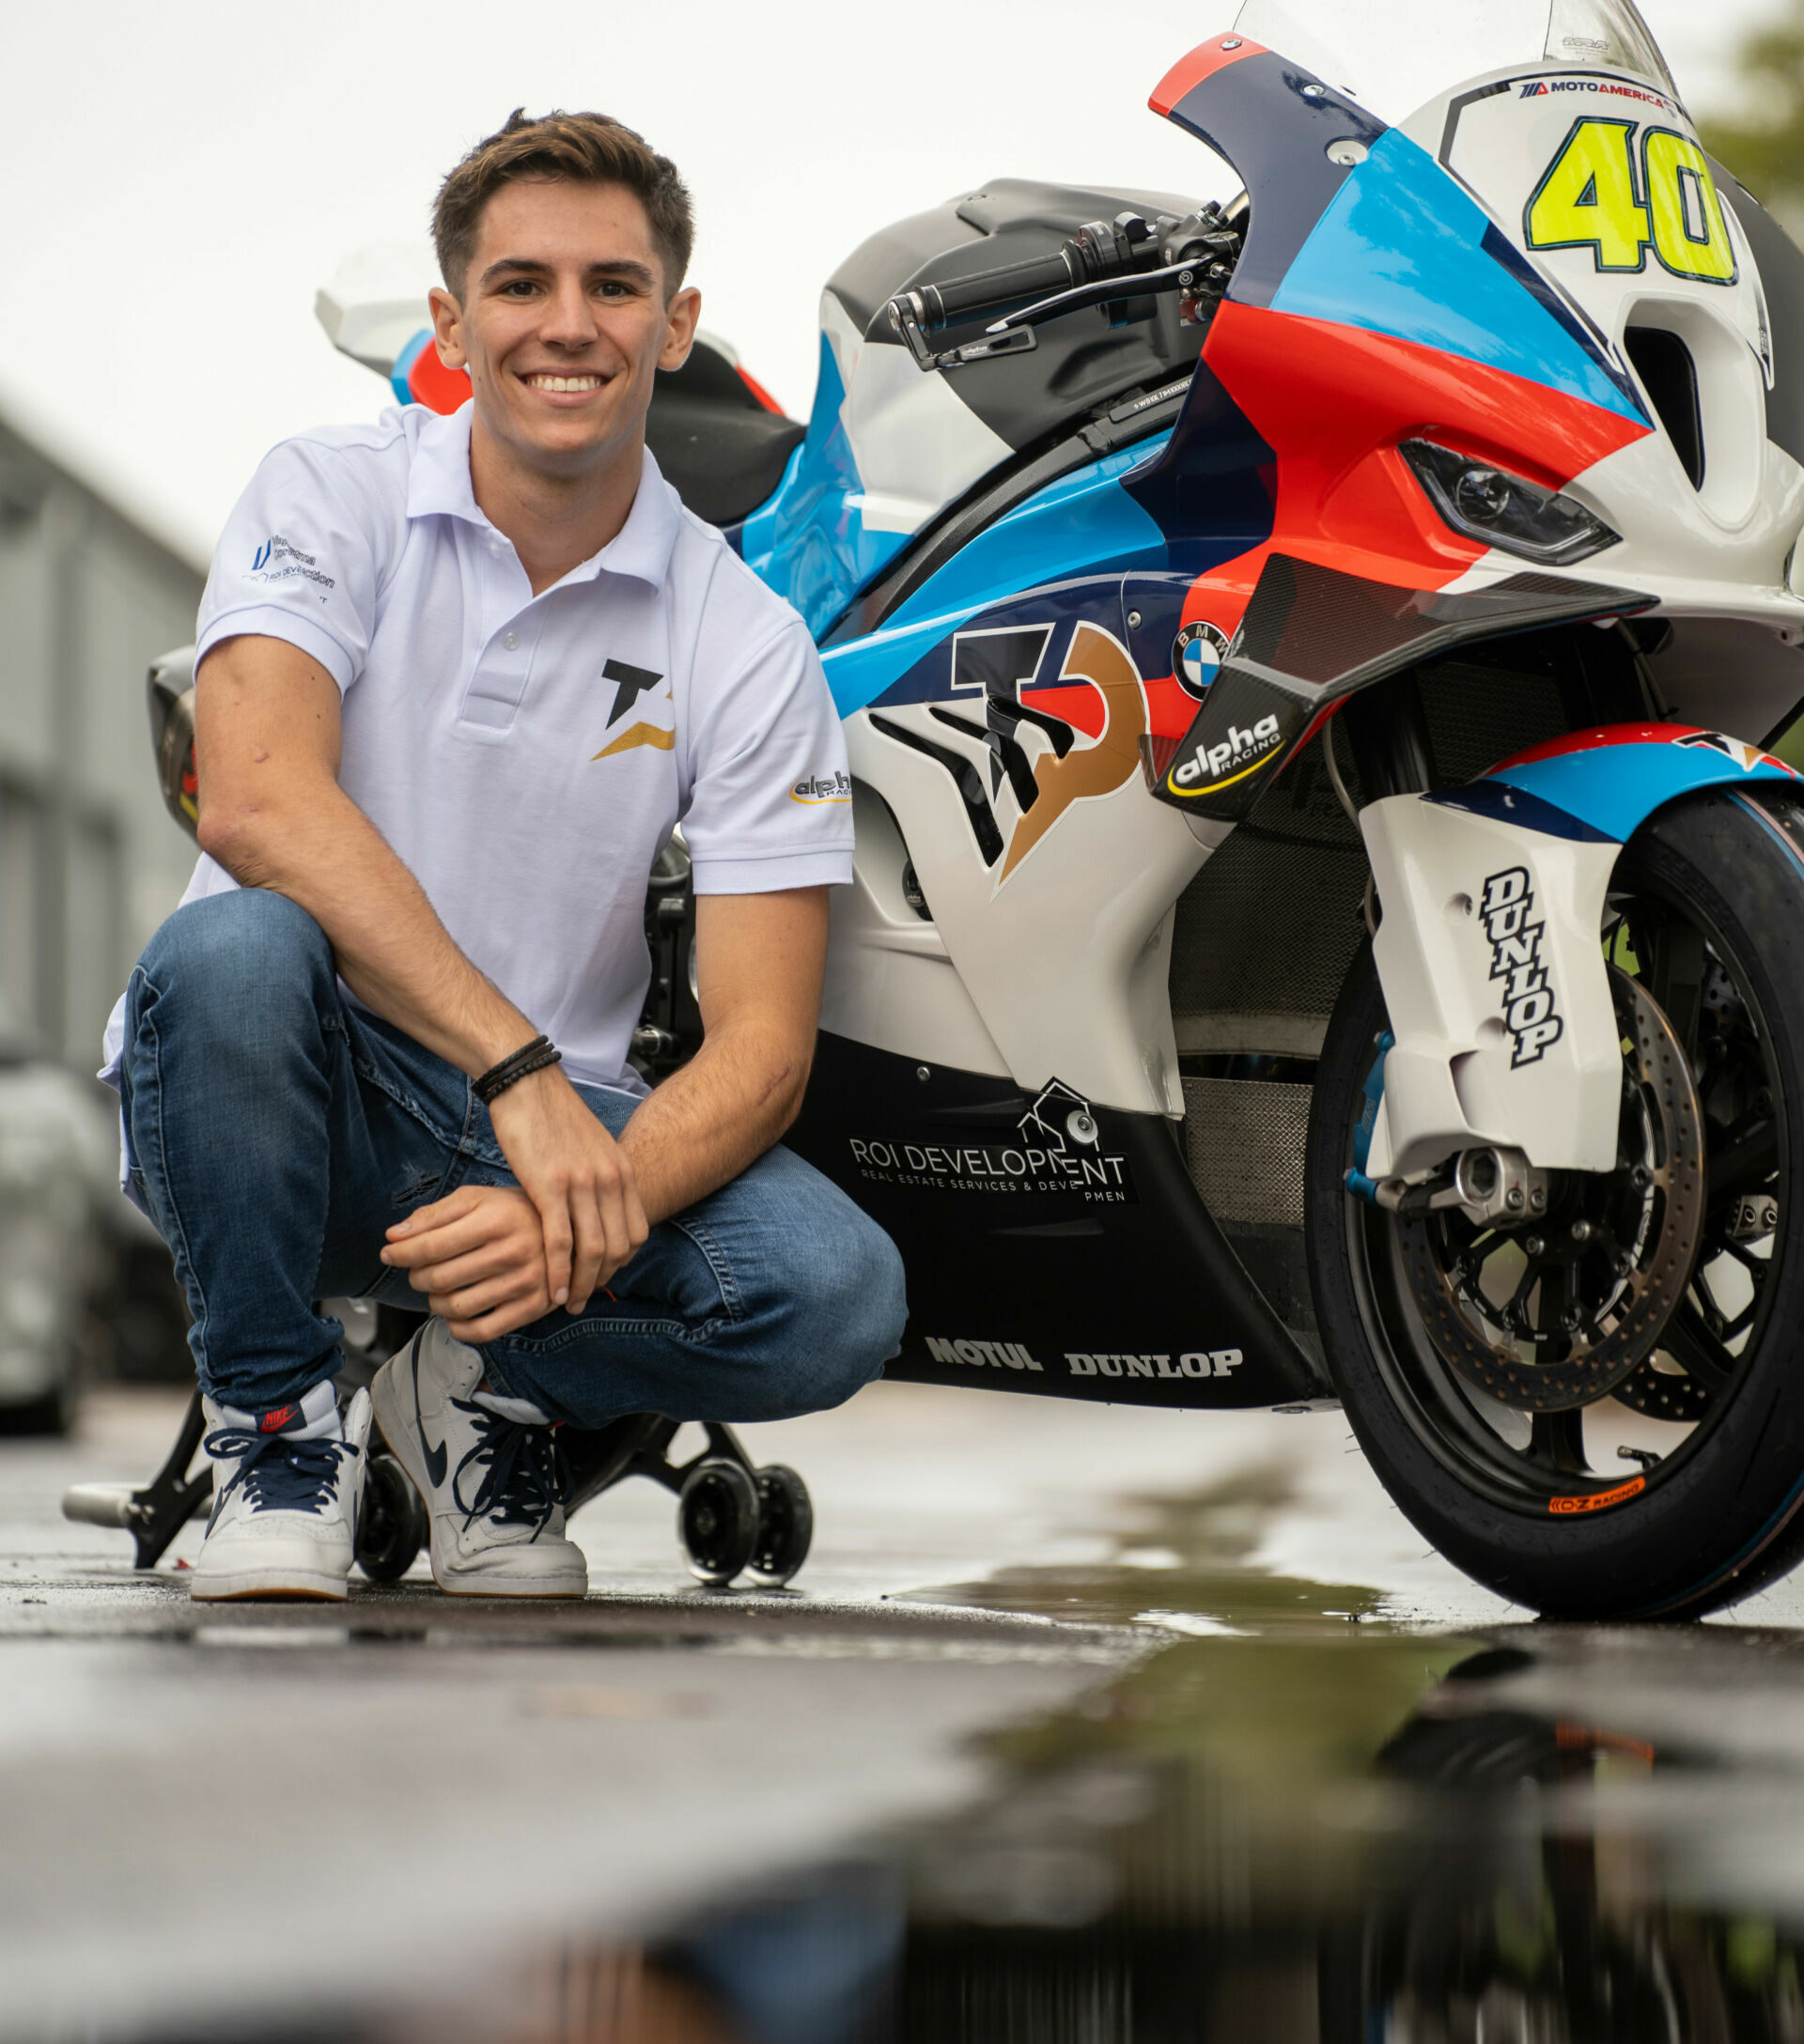 Sean Dylan Kelly and his new TopPro Racing BMW M 1000 RR. Photo courtesy TopPro Racing.